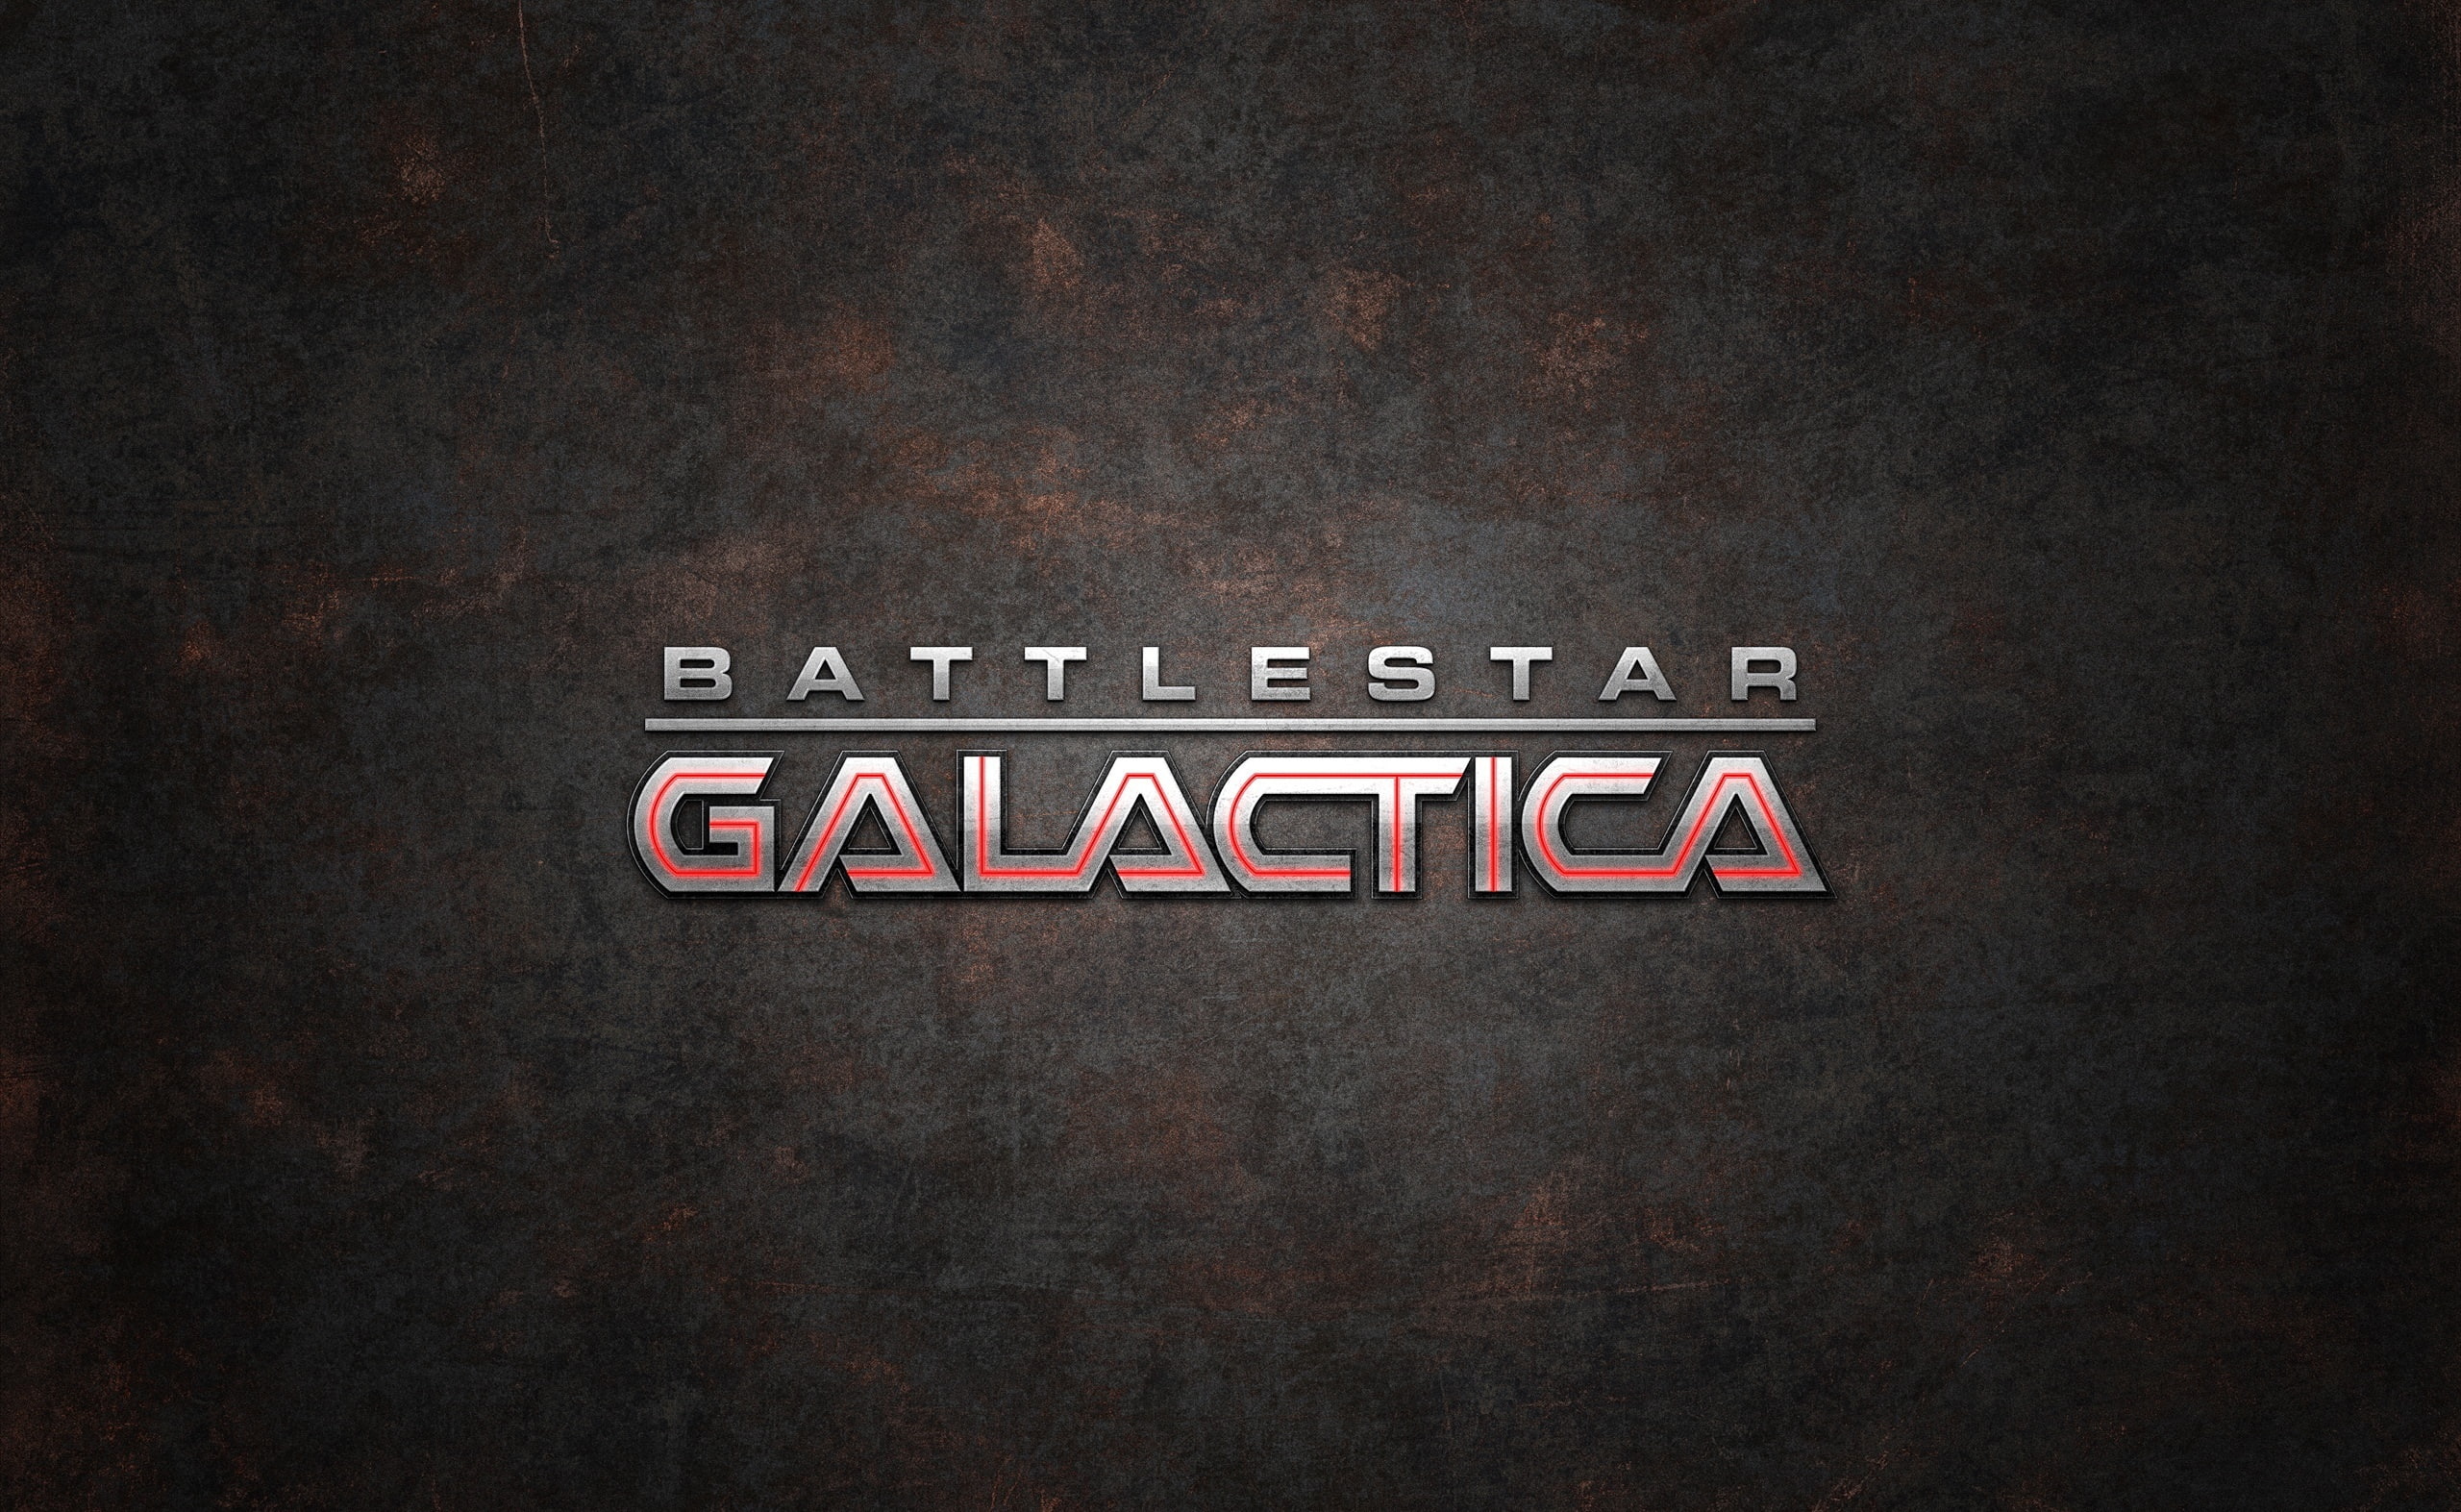 Battlestar Galactica, Battlestar Galactica logo, Movies, Other Movies